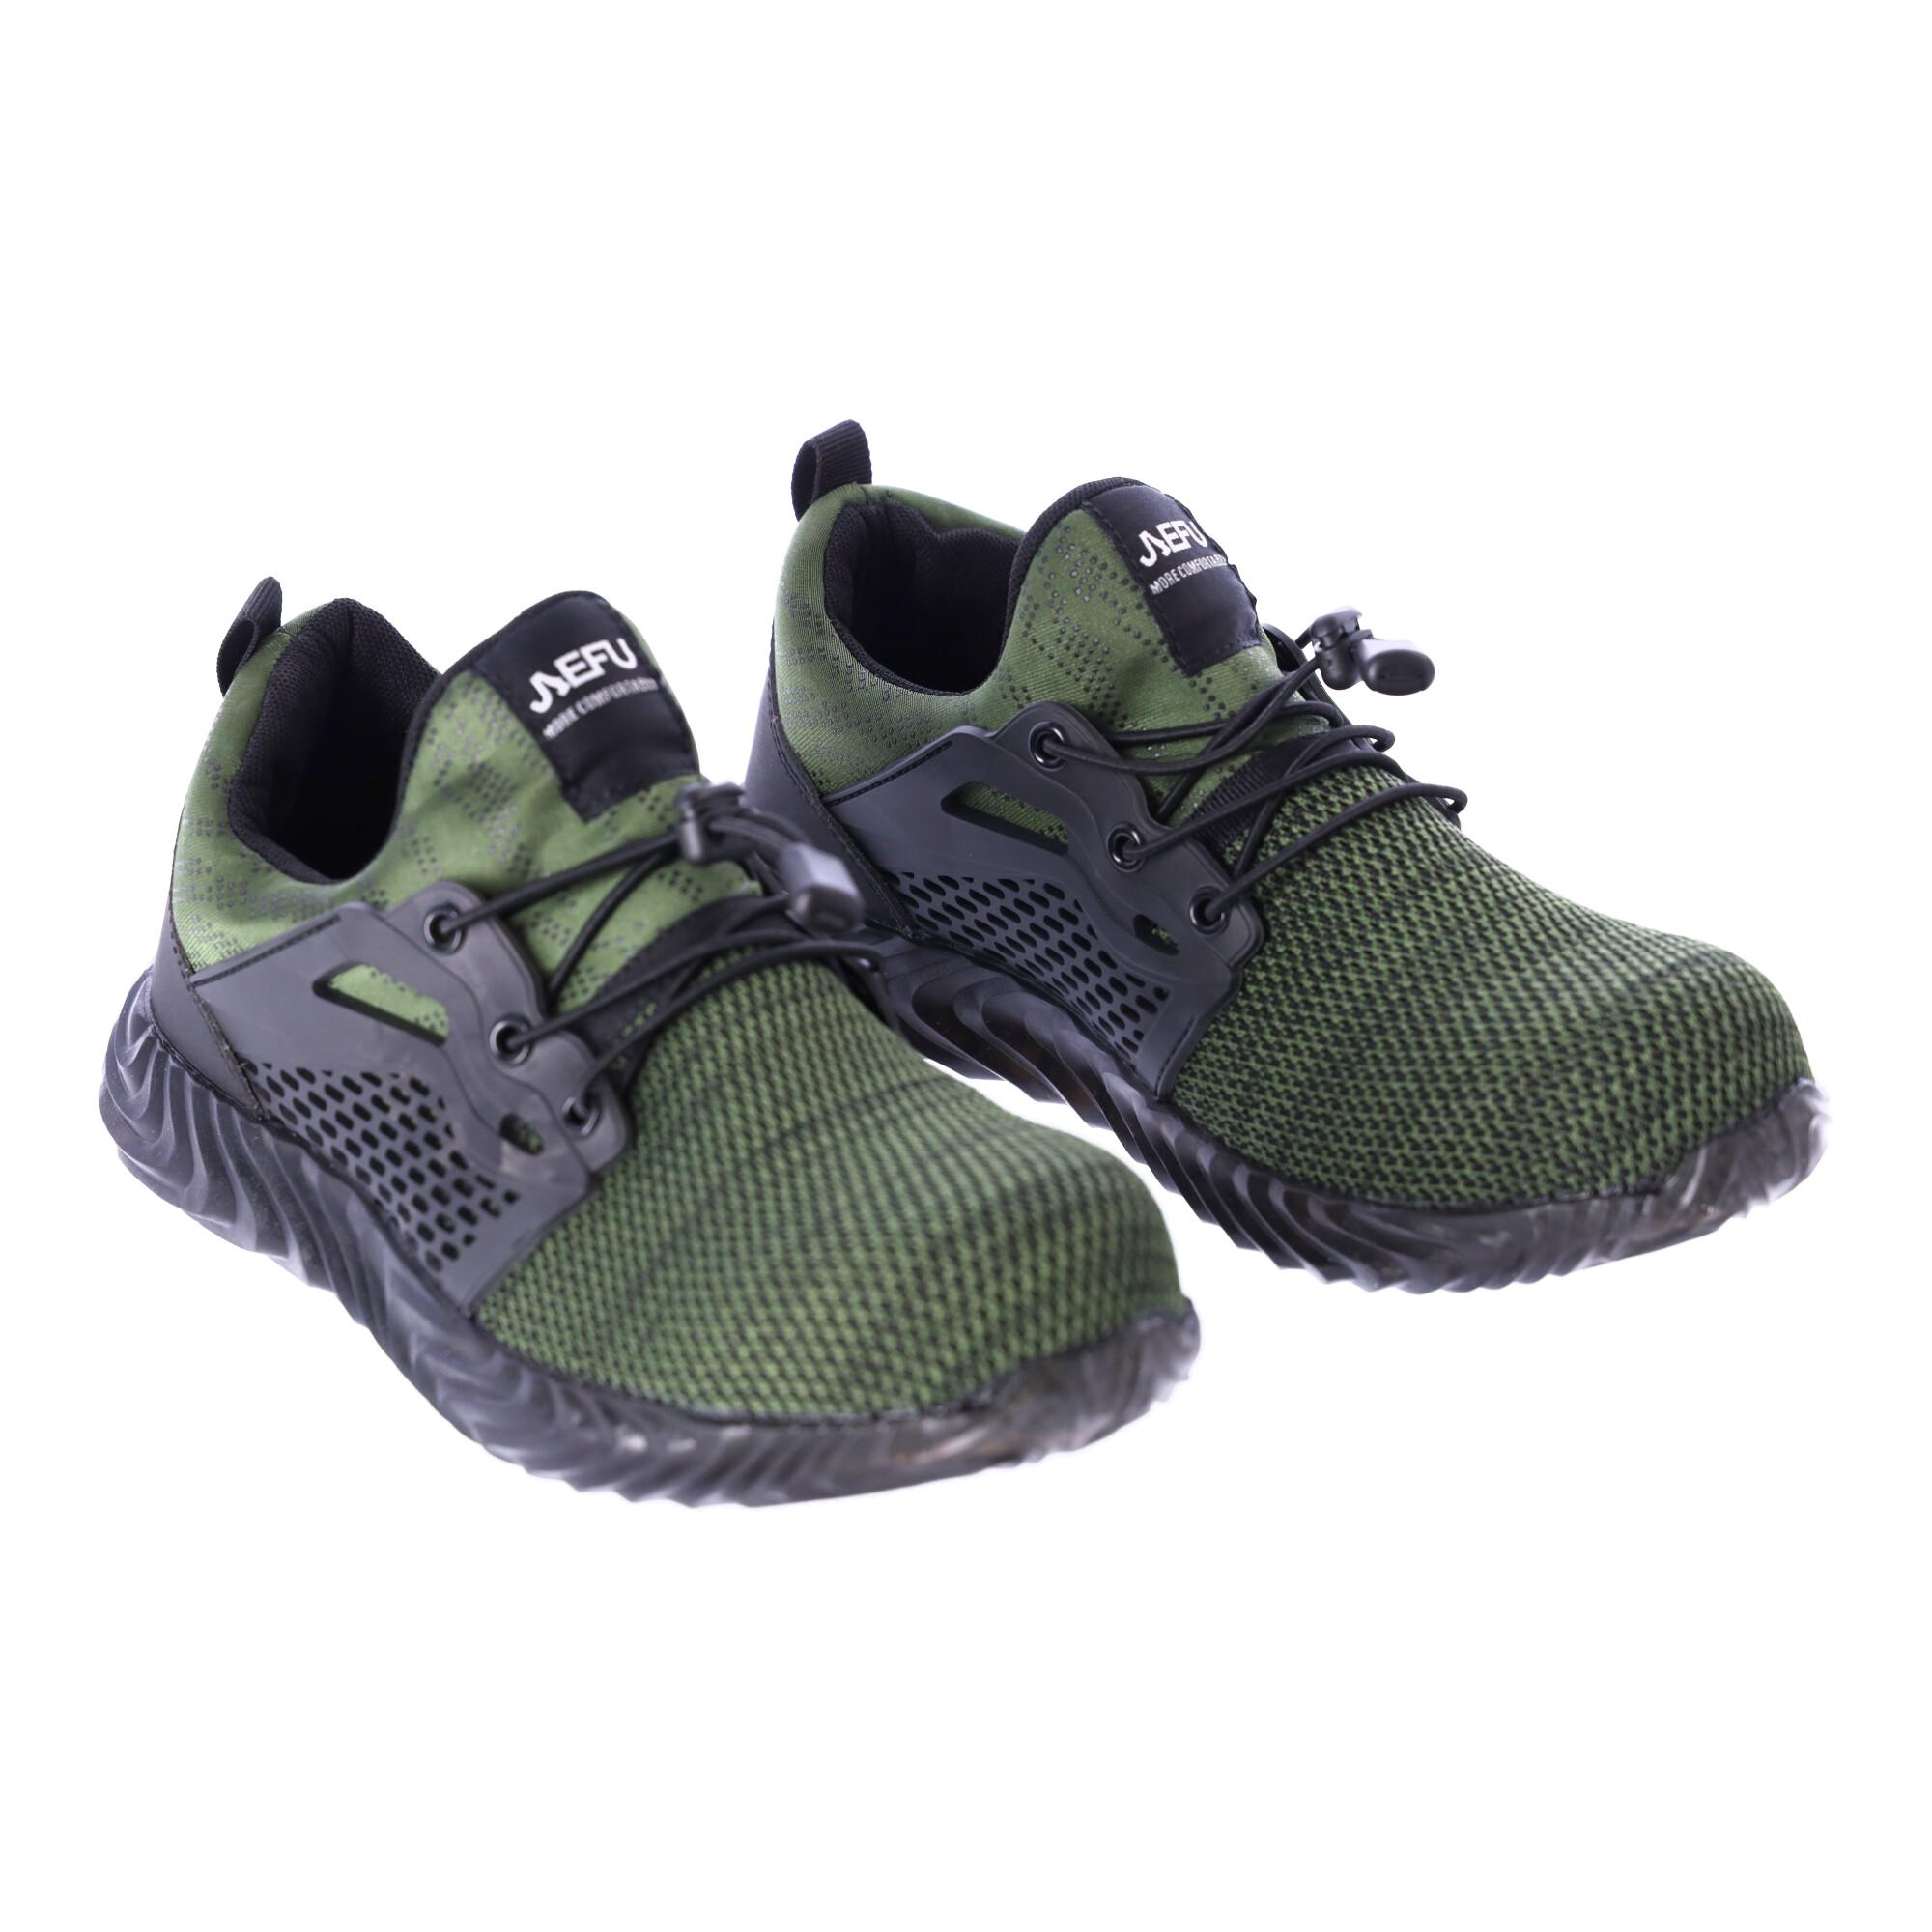 Work safety shoes "43" - green